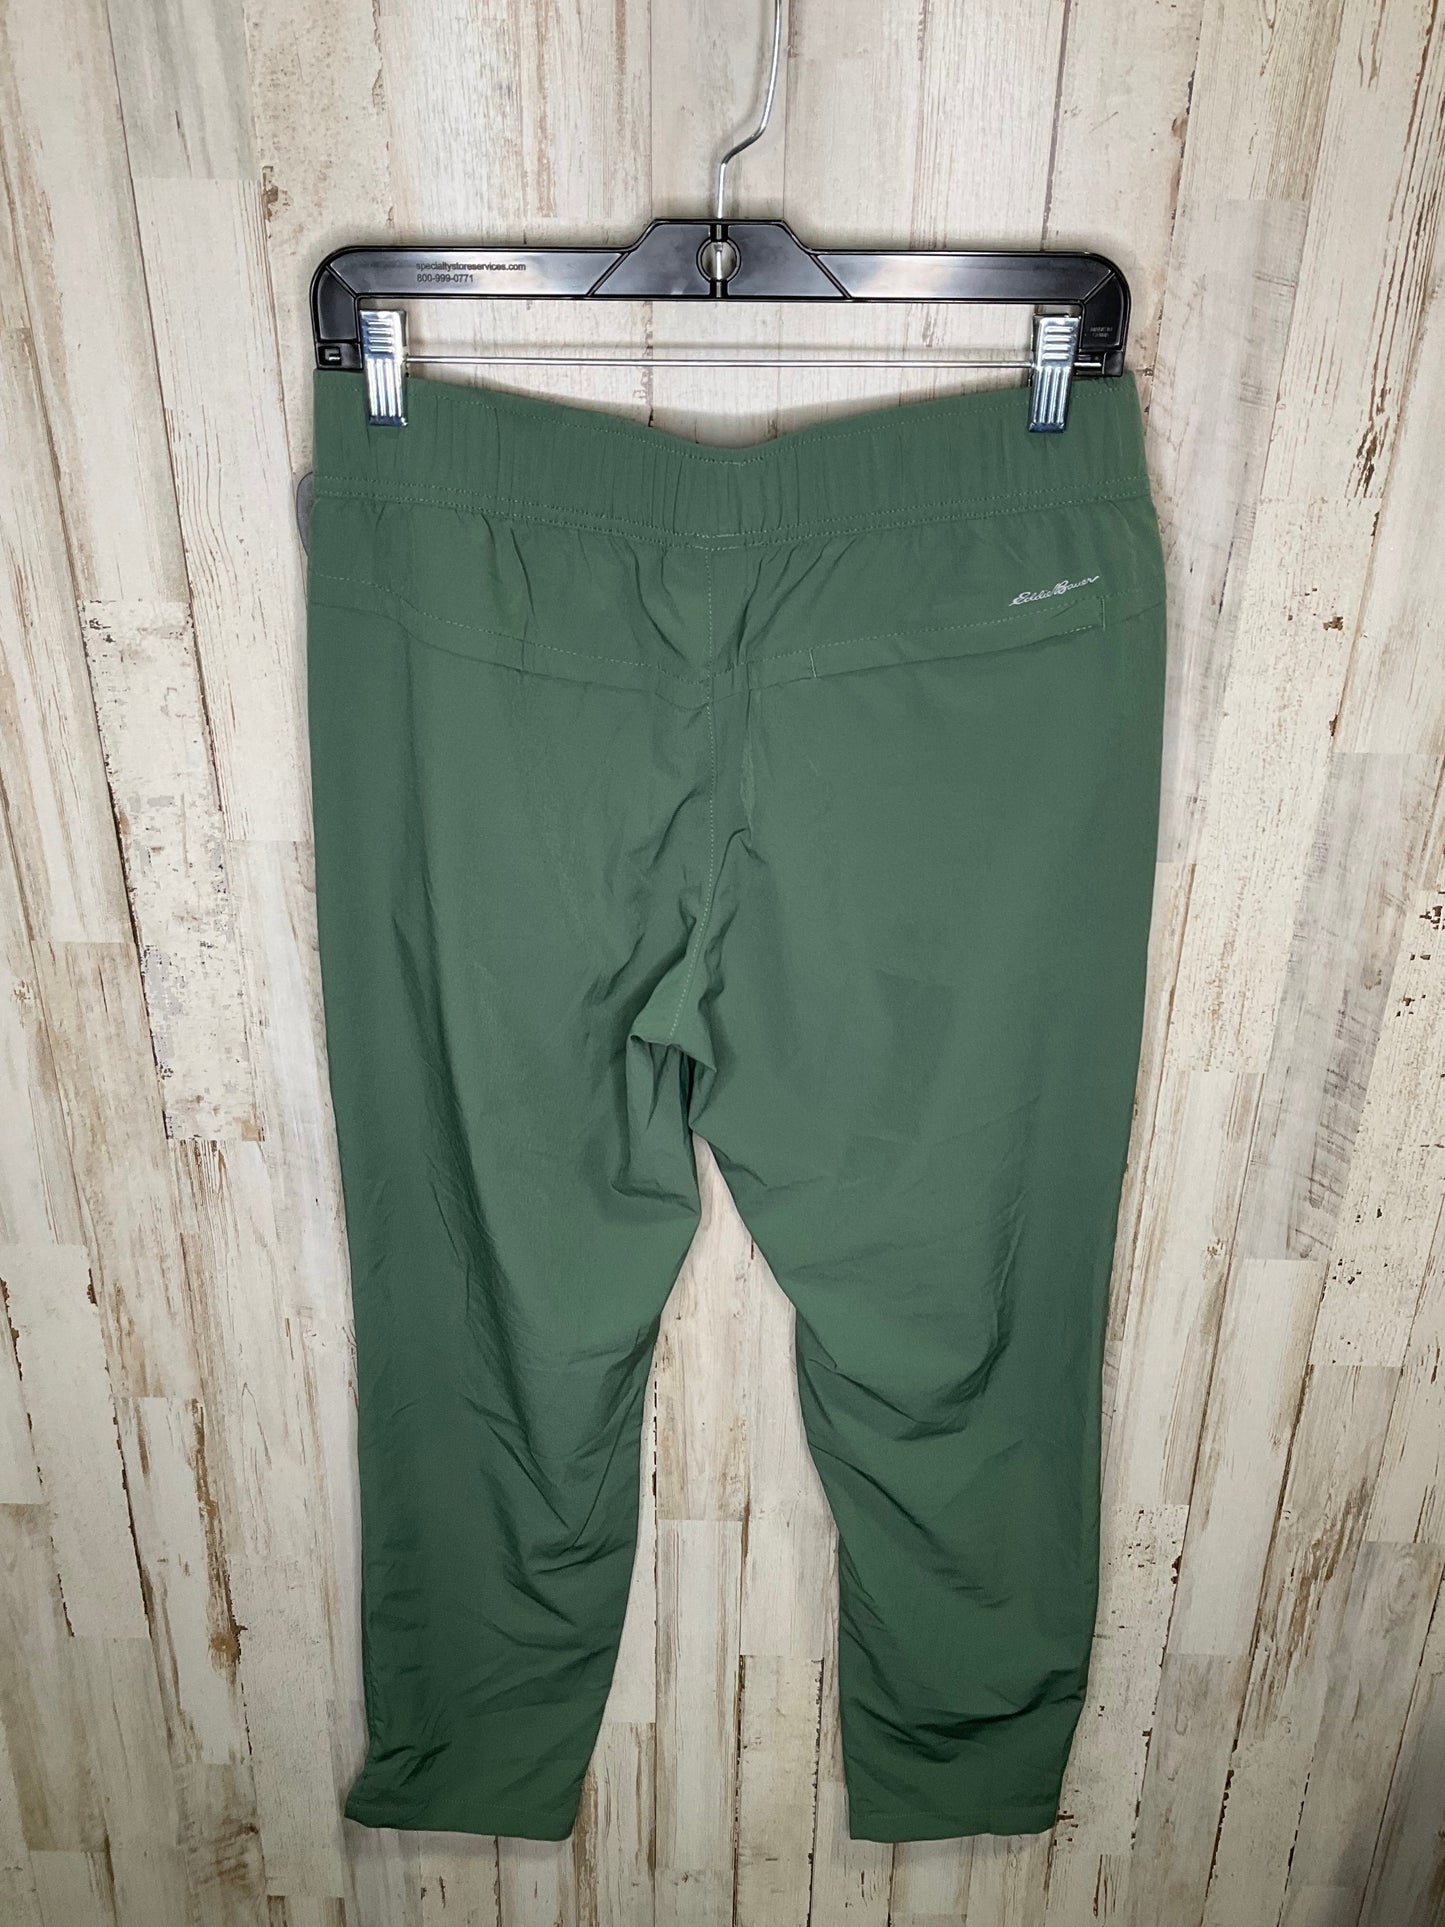 Athletic Pants By Eddie Bauer  Size: S